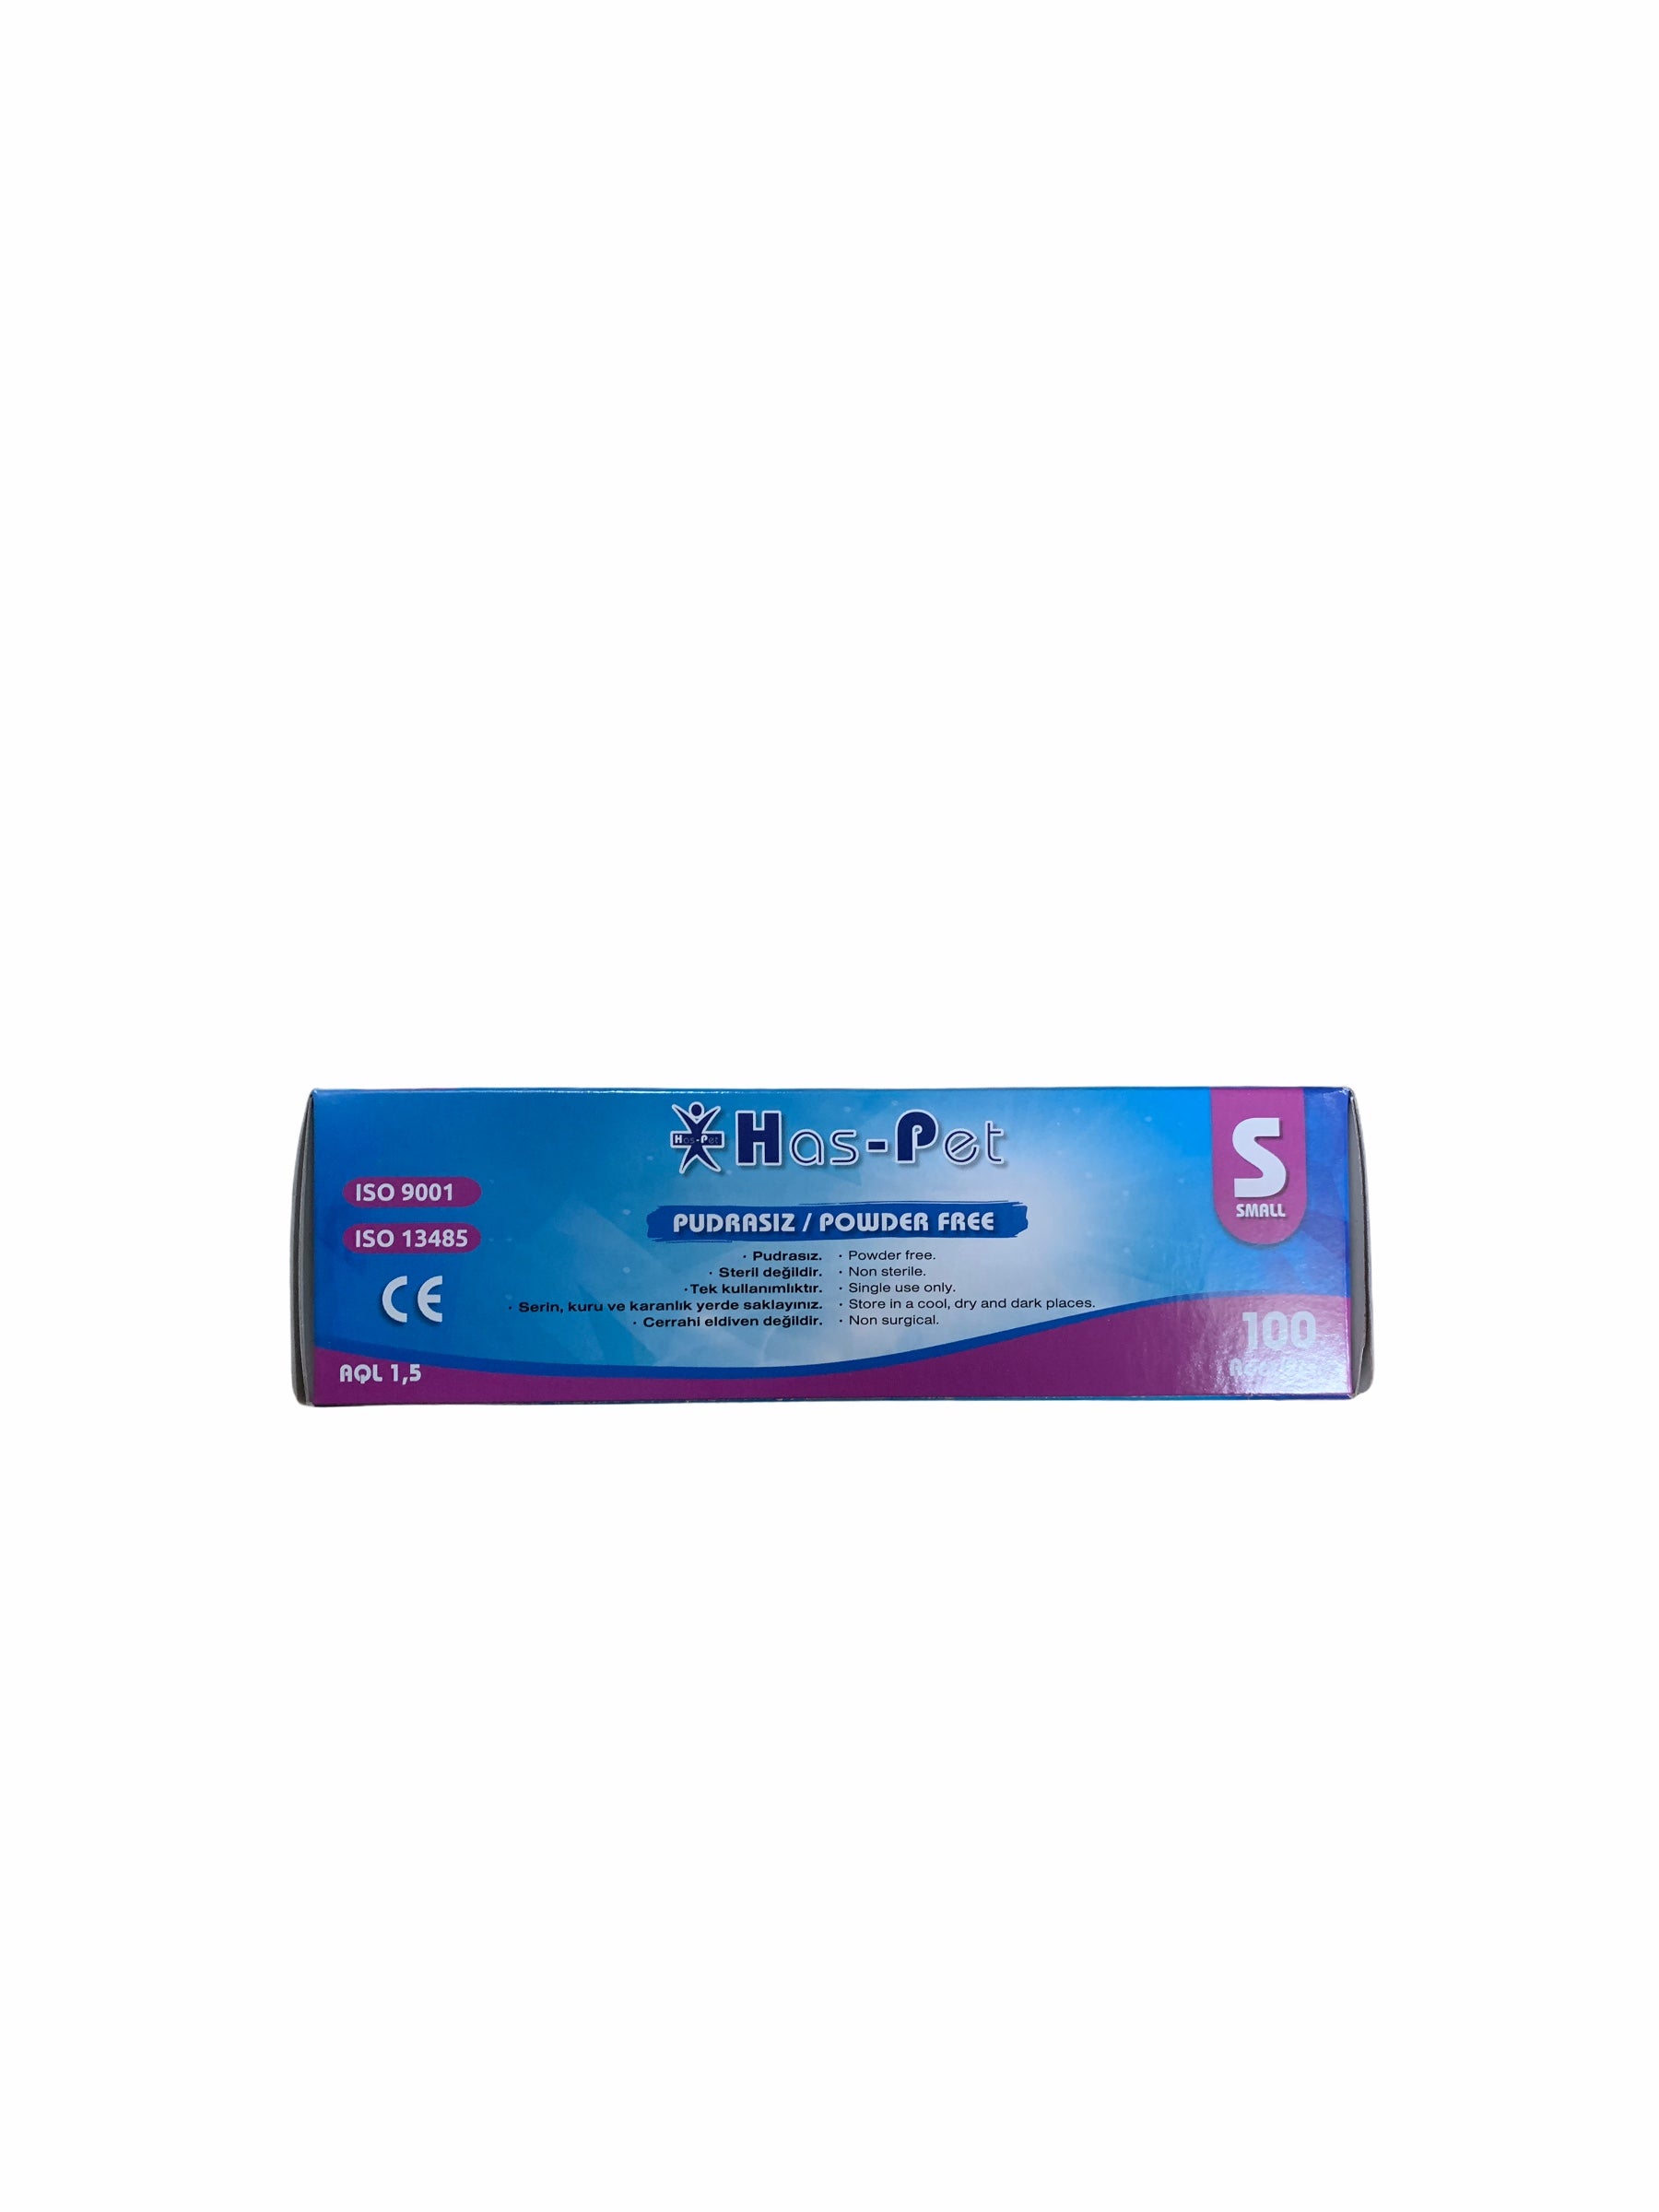 Small Nitrile Gloves